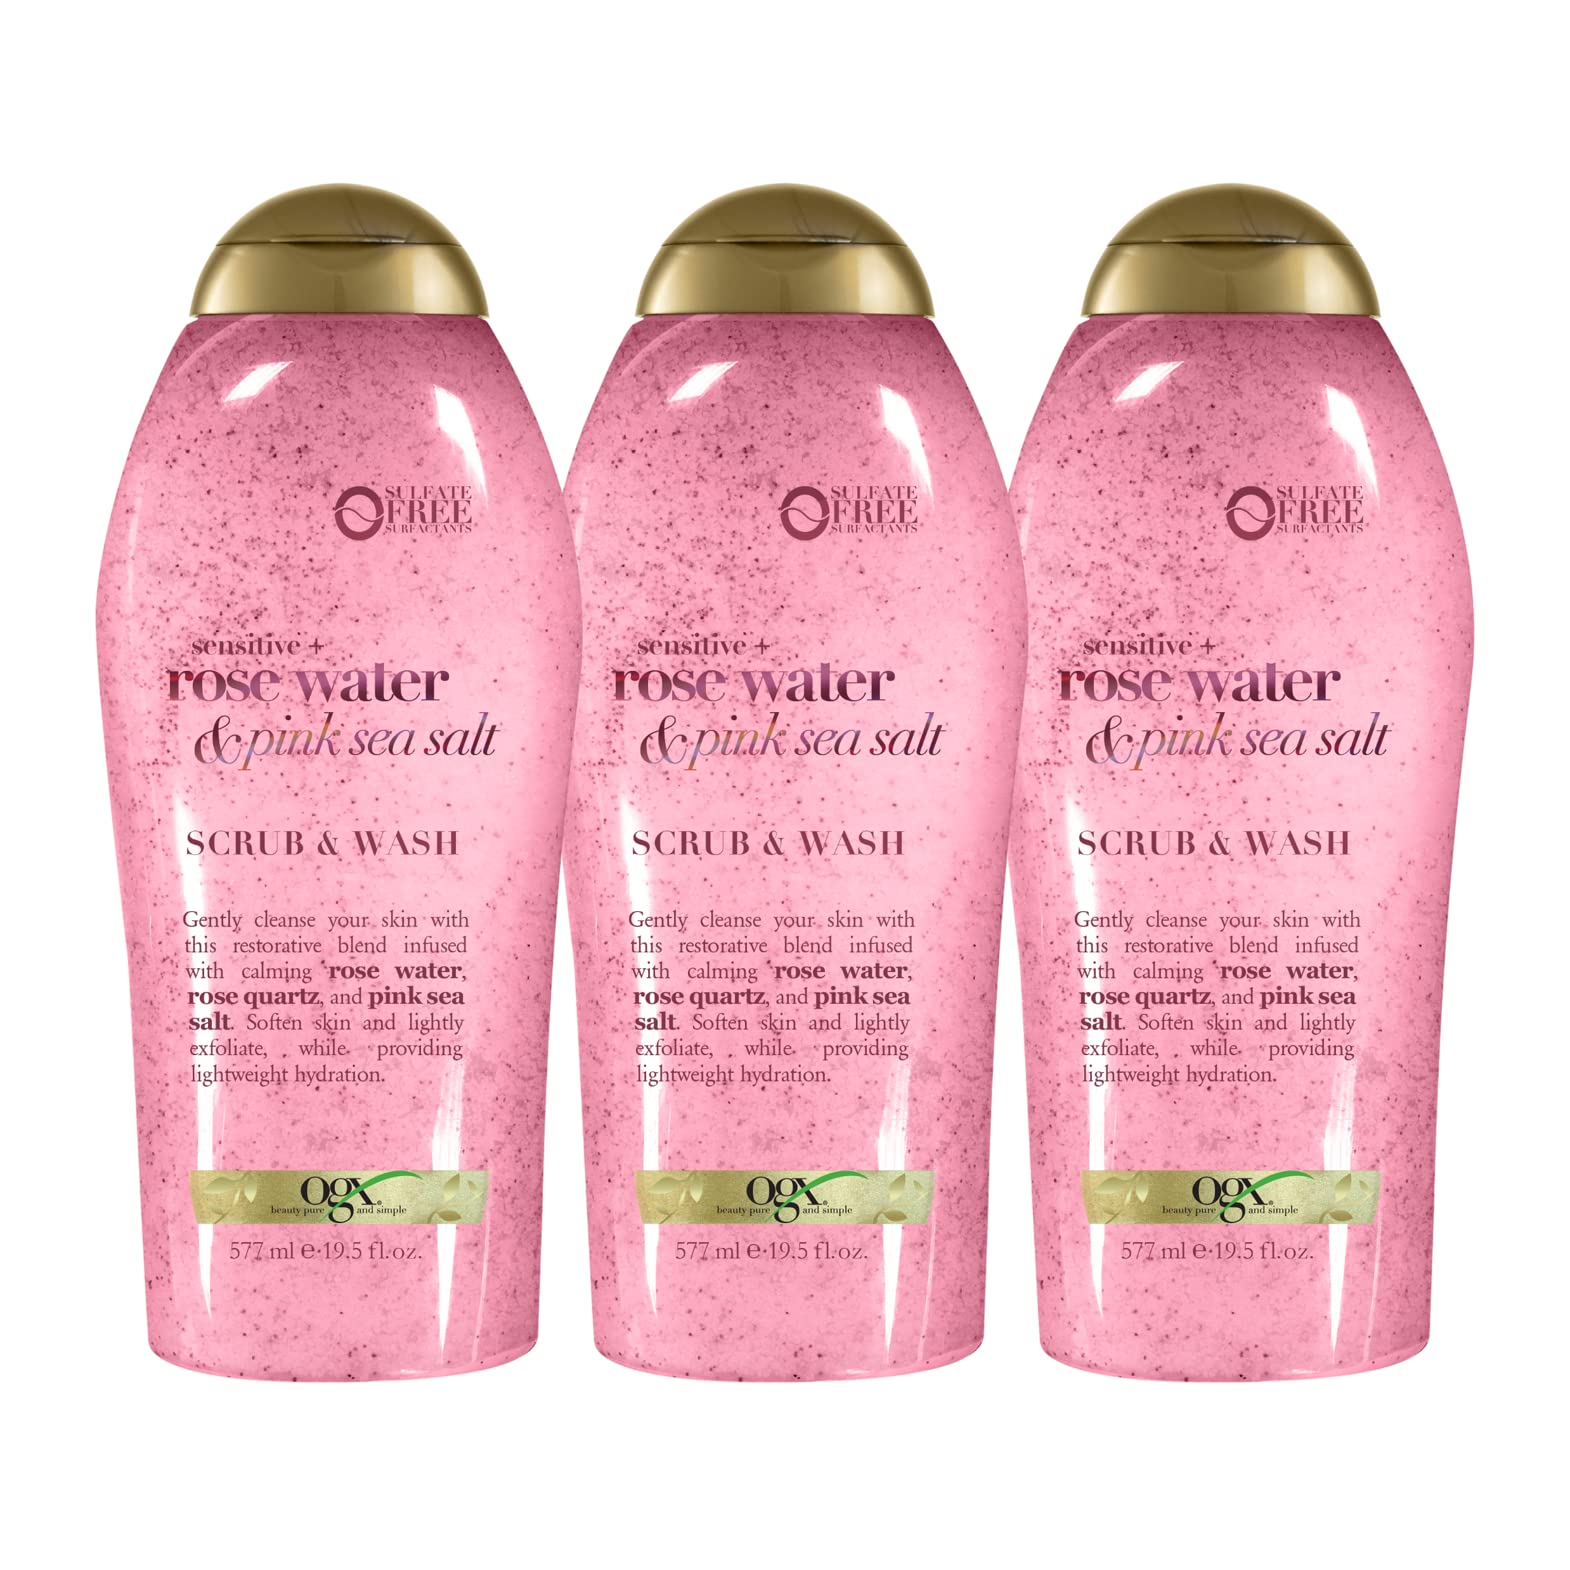 OGX Sensitive + Pink Sea Salt & Rosewater Sulfate-Free Soothing Body Scrub with Healing Rose Quartz, Gentle Exfoliating Daily Body Wash to Soften & Smooth Skin, 19.5 Fl Oz (pack of 3)